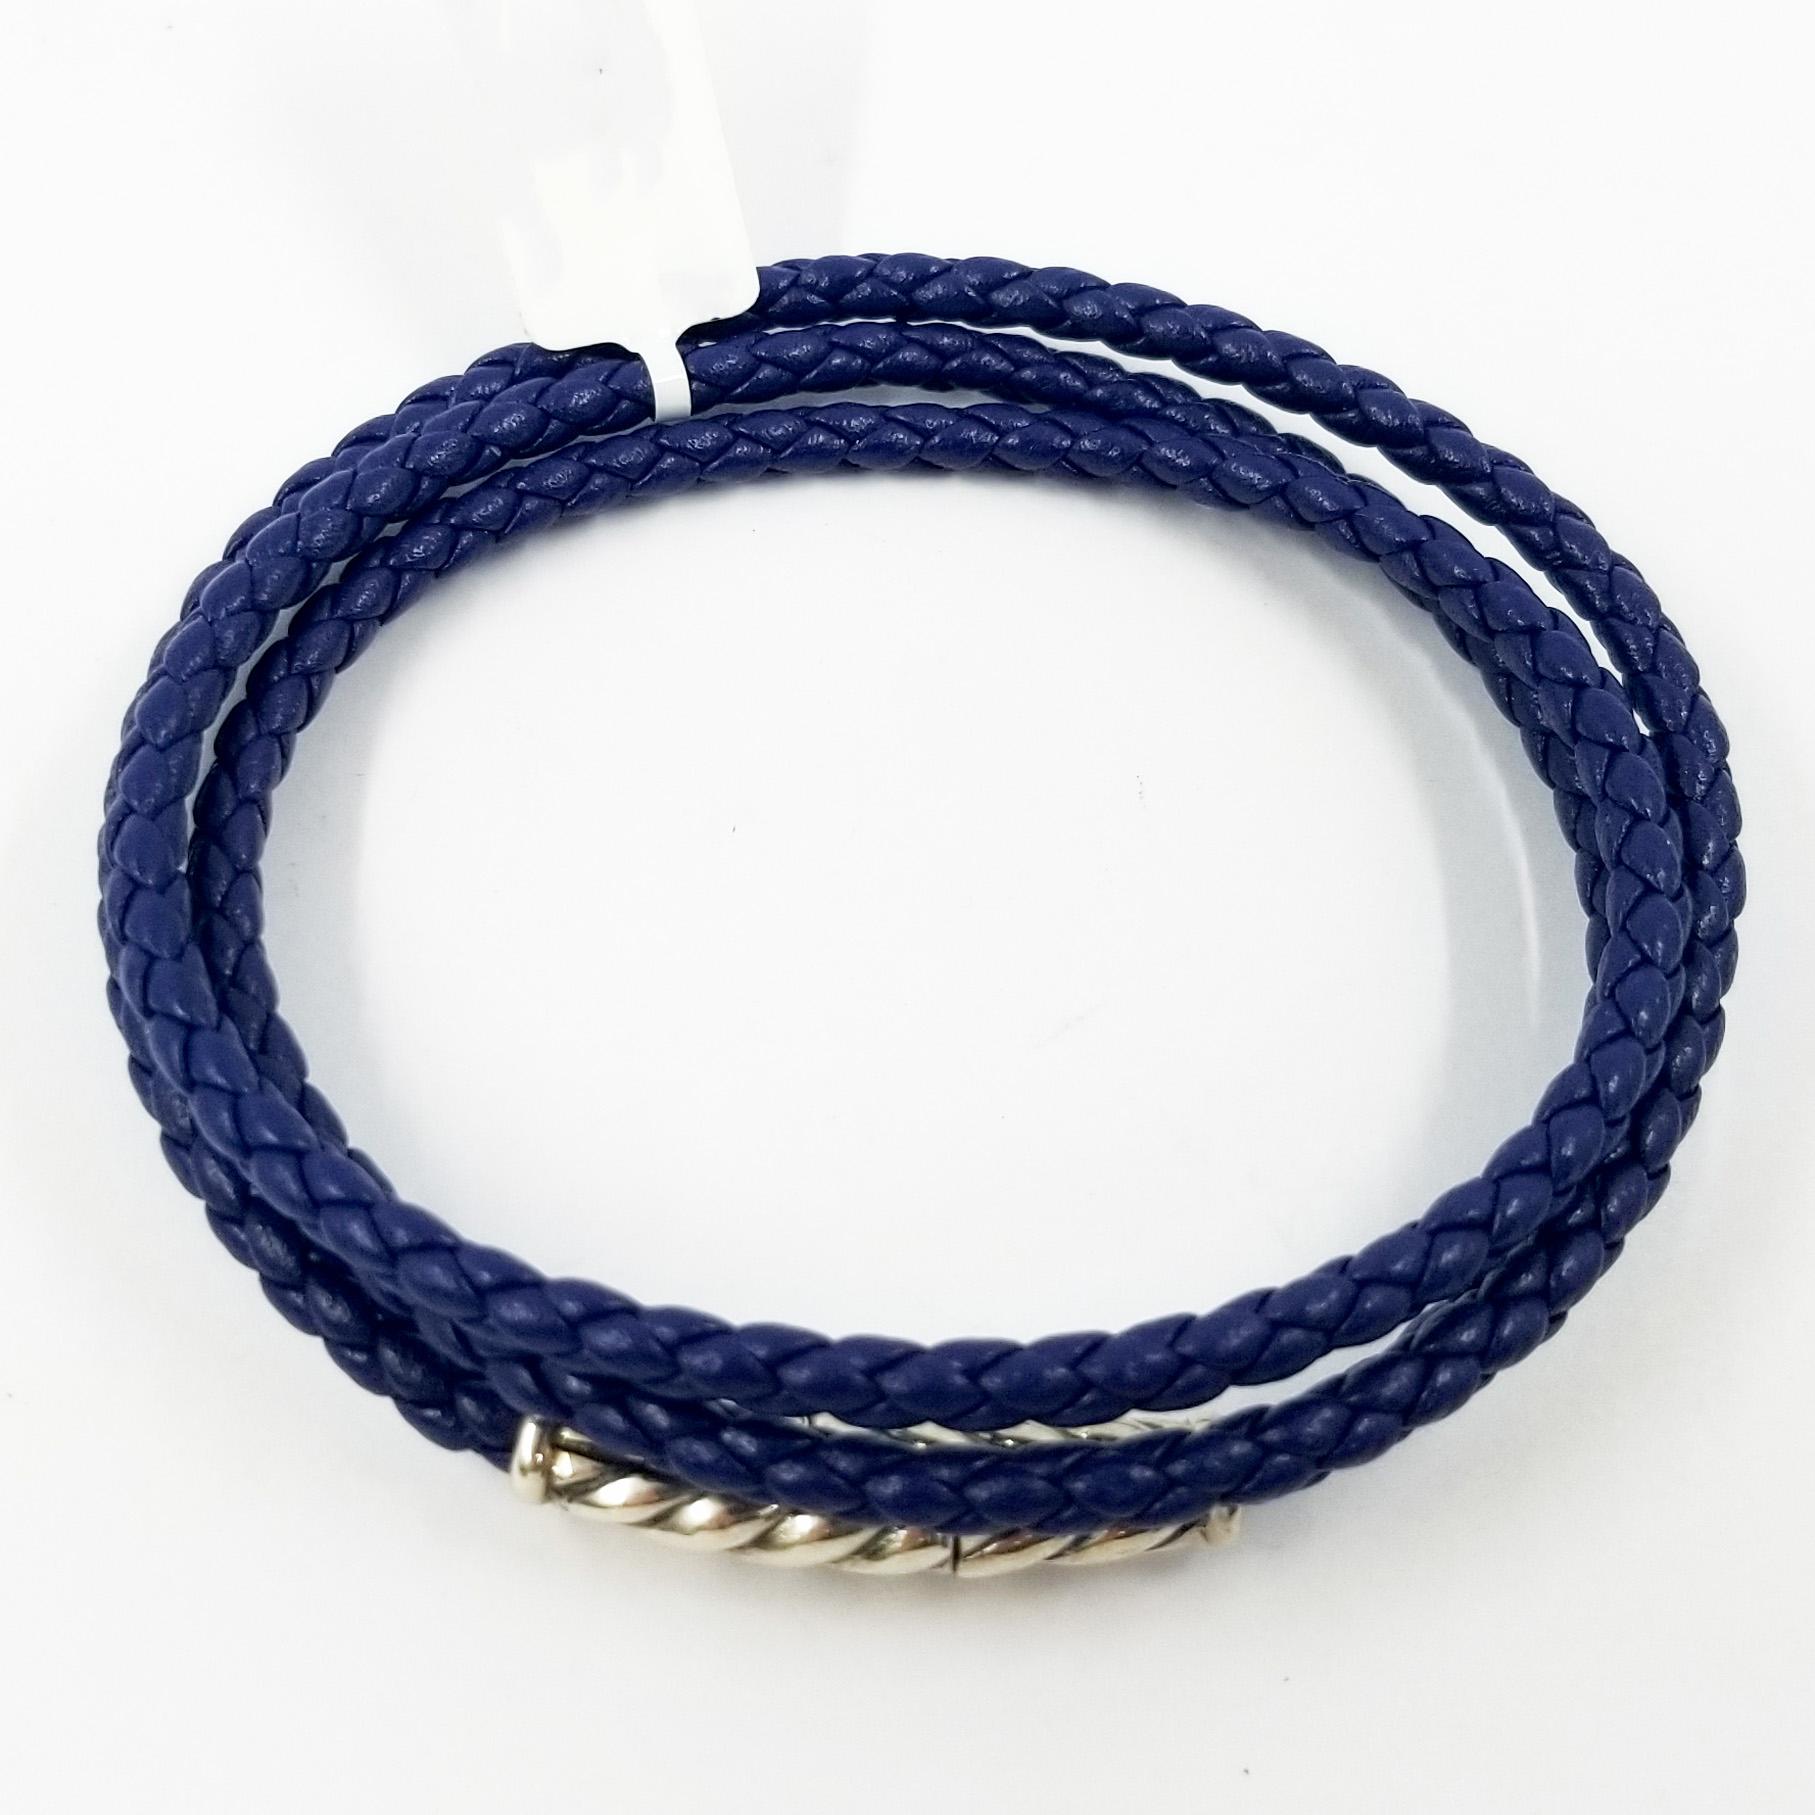 Sterling Silver and Woven Blue Leather Triple Wrap Bracelet, stamped 925 by designer David Yurman. The magnetic clasp features a notched design for extra security. Can be worn as a women's triple wrap bracelet, or opened as a 21.5 inch necklace.